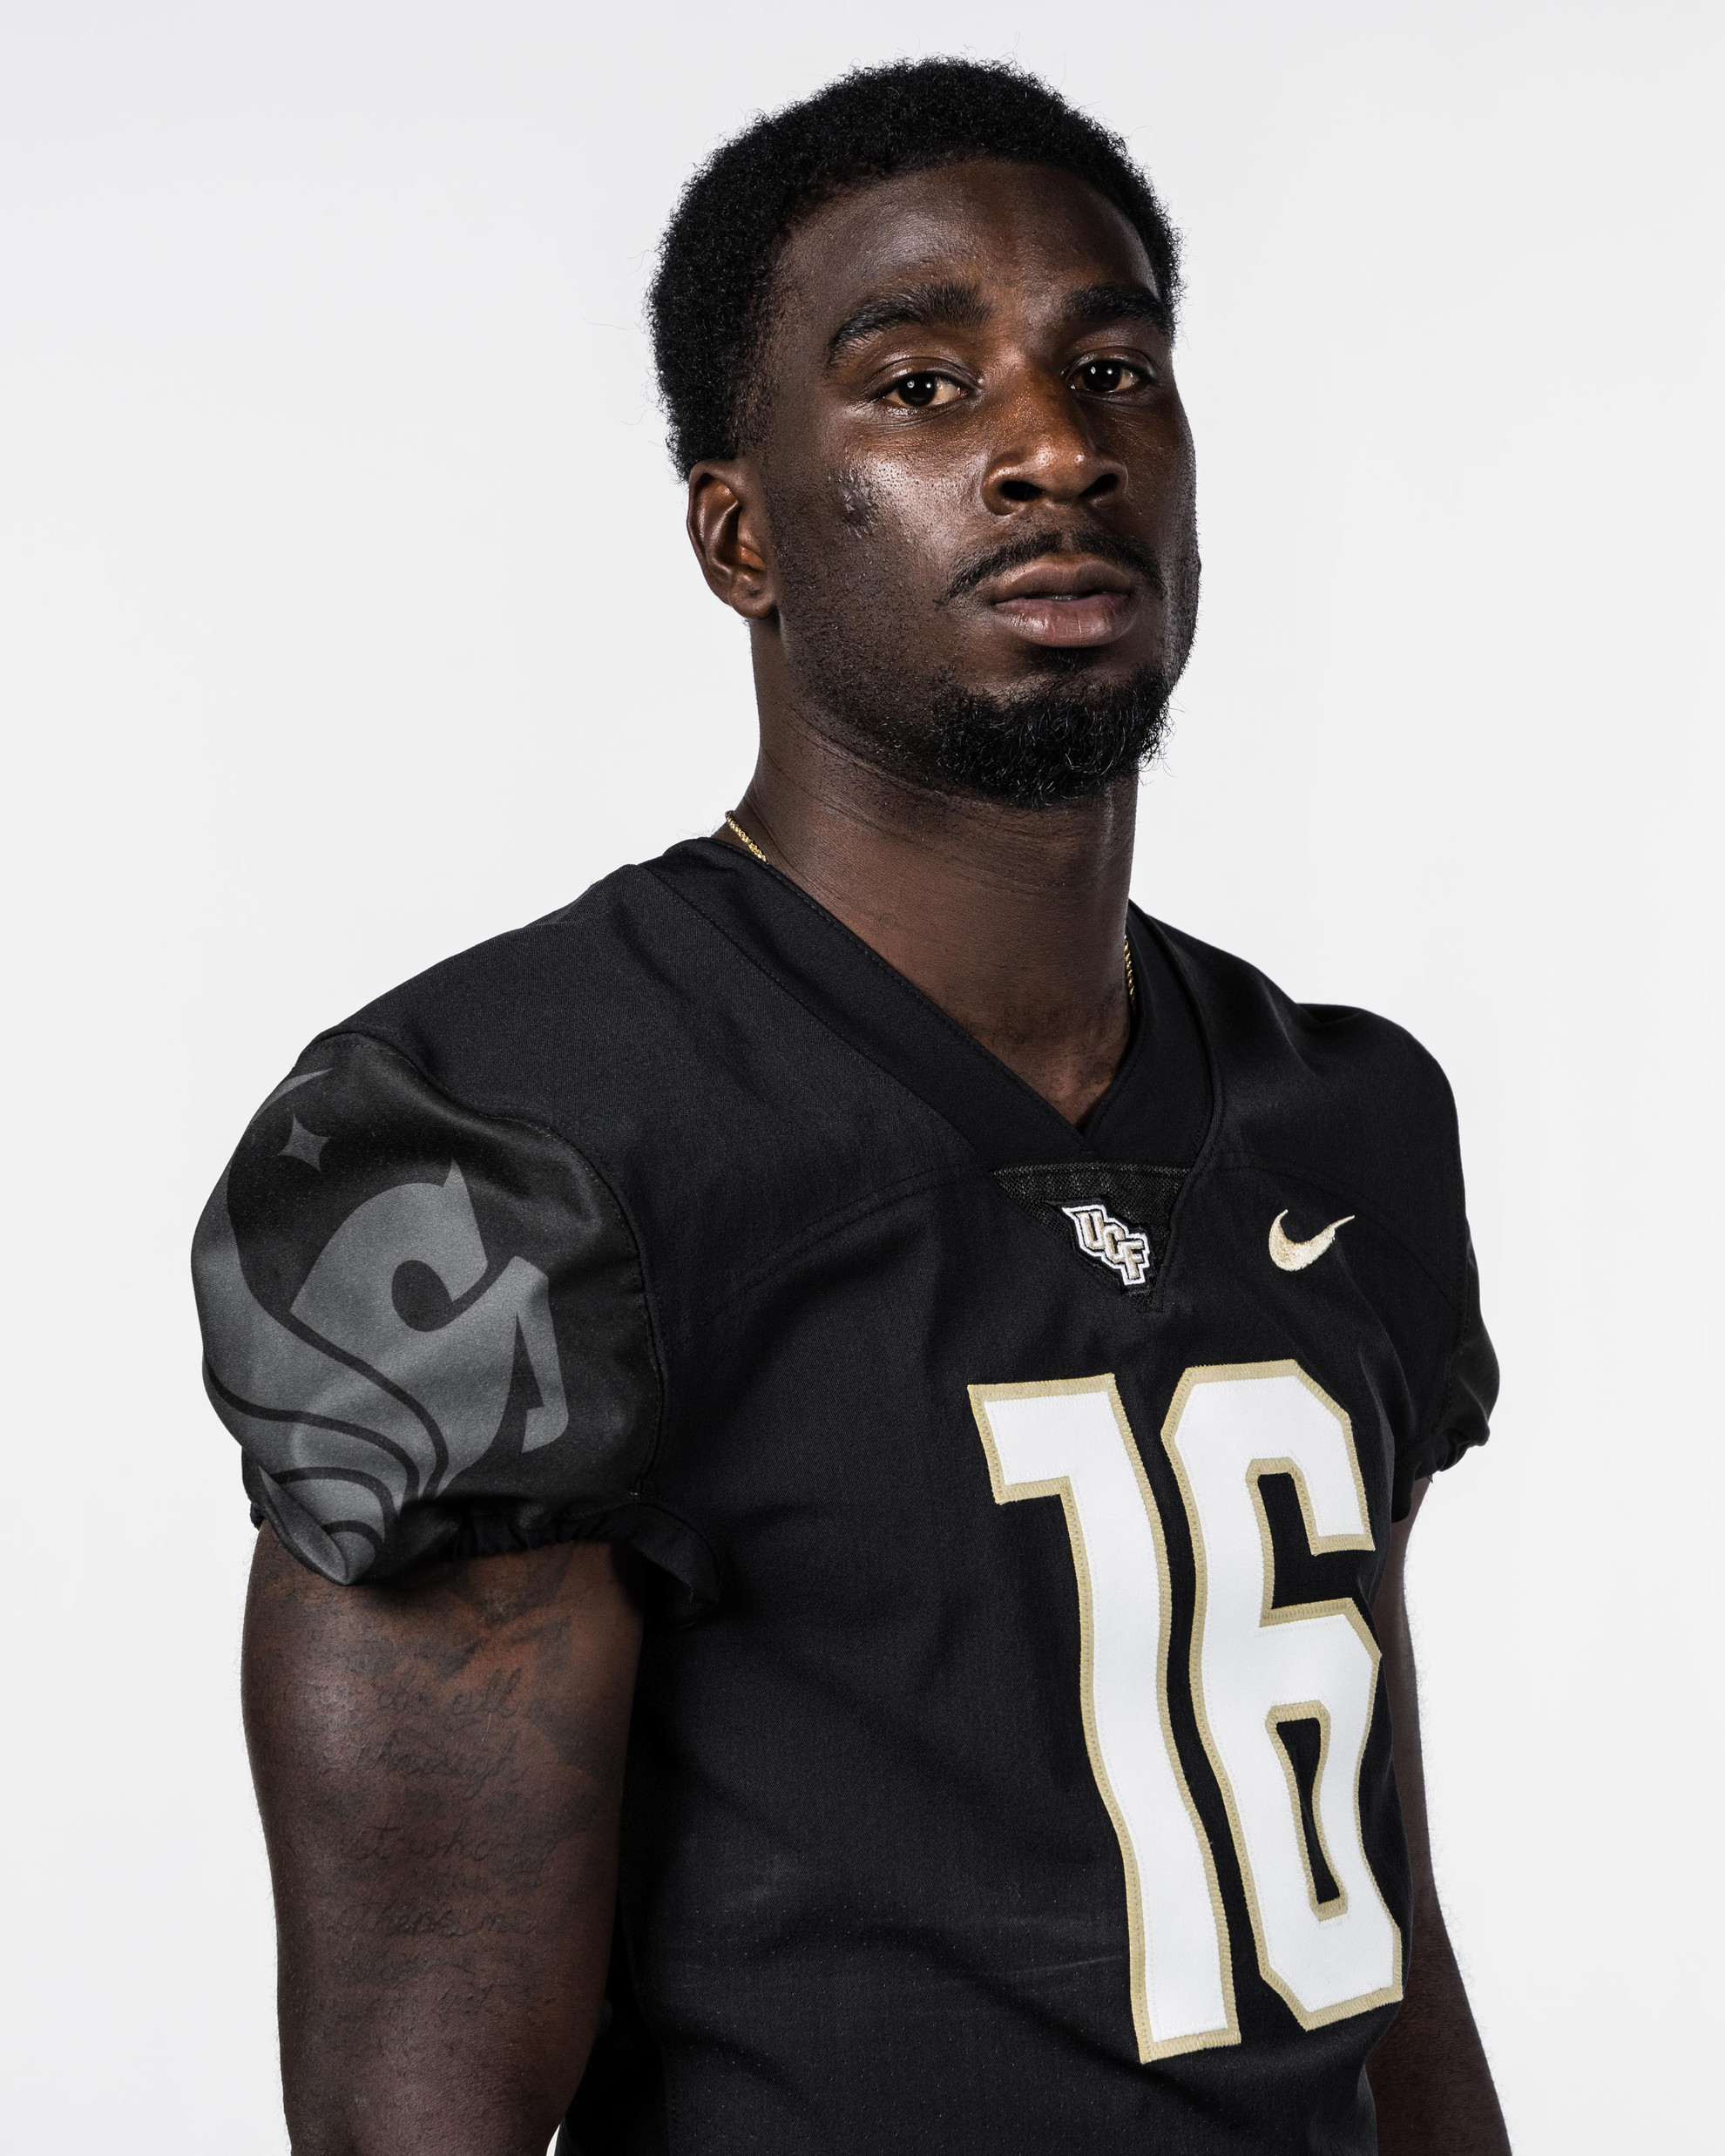 Former USF QB Timmy McClain Transferring to UCF - Black & Gold Banneret